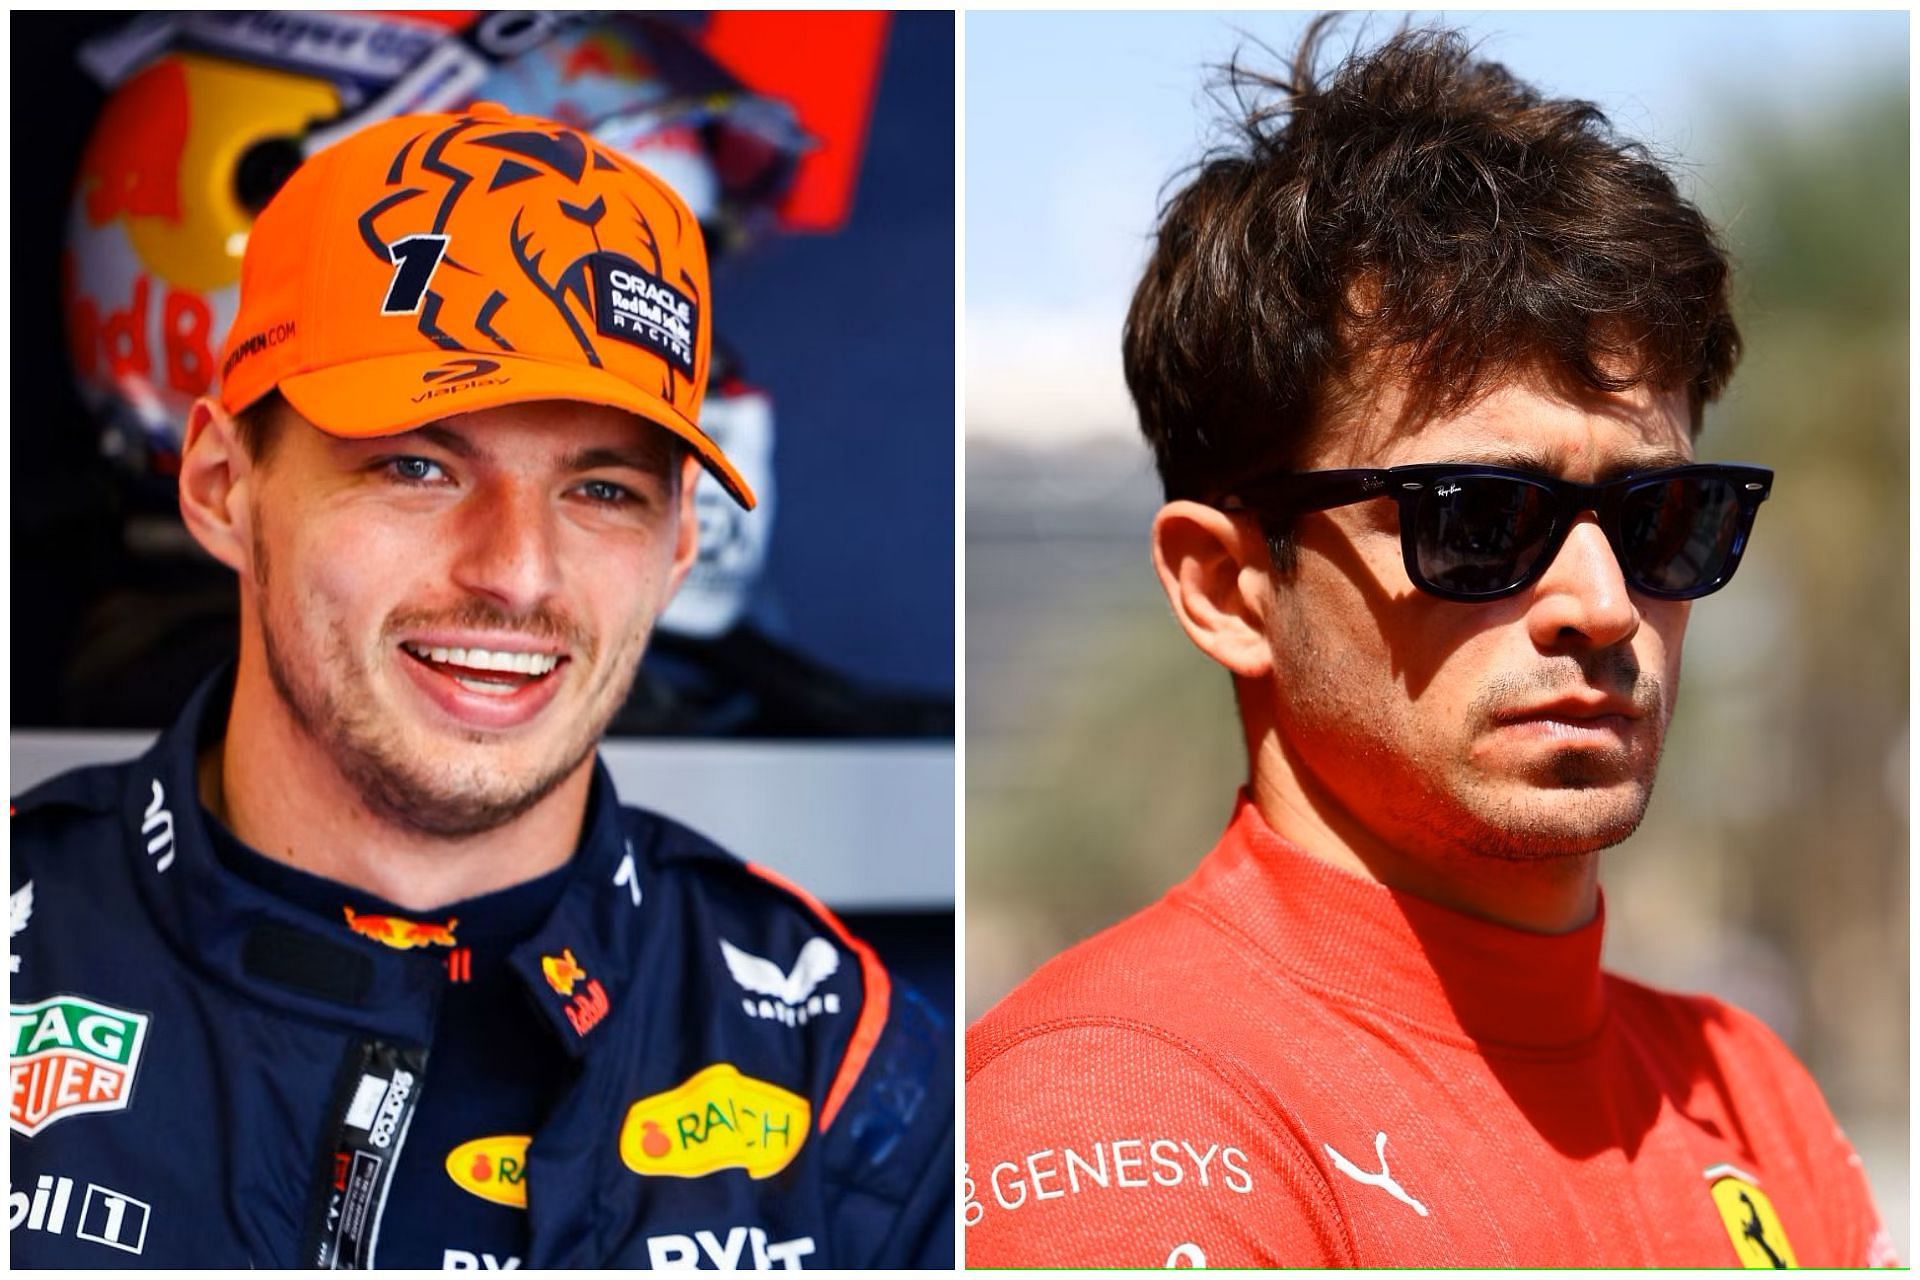 Max Verstappen (L) and Charles Leclerc (R) (Collage via Sportskeeda)